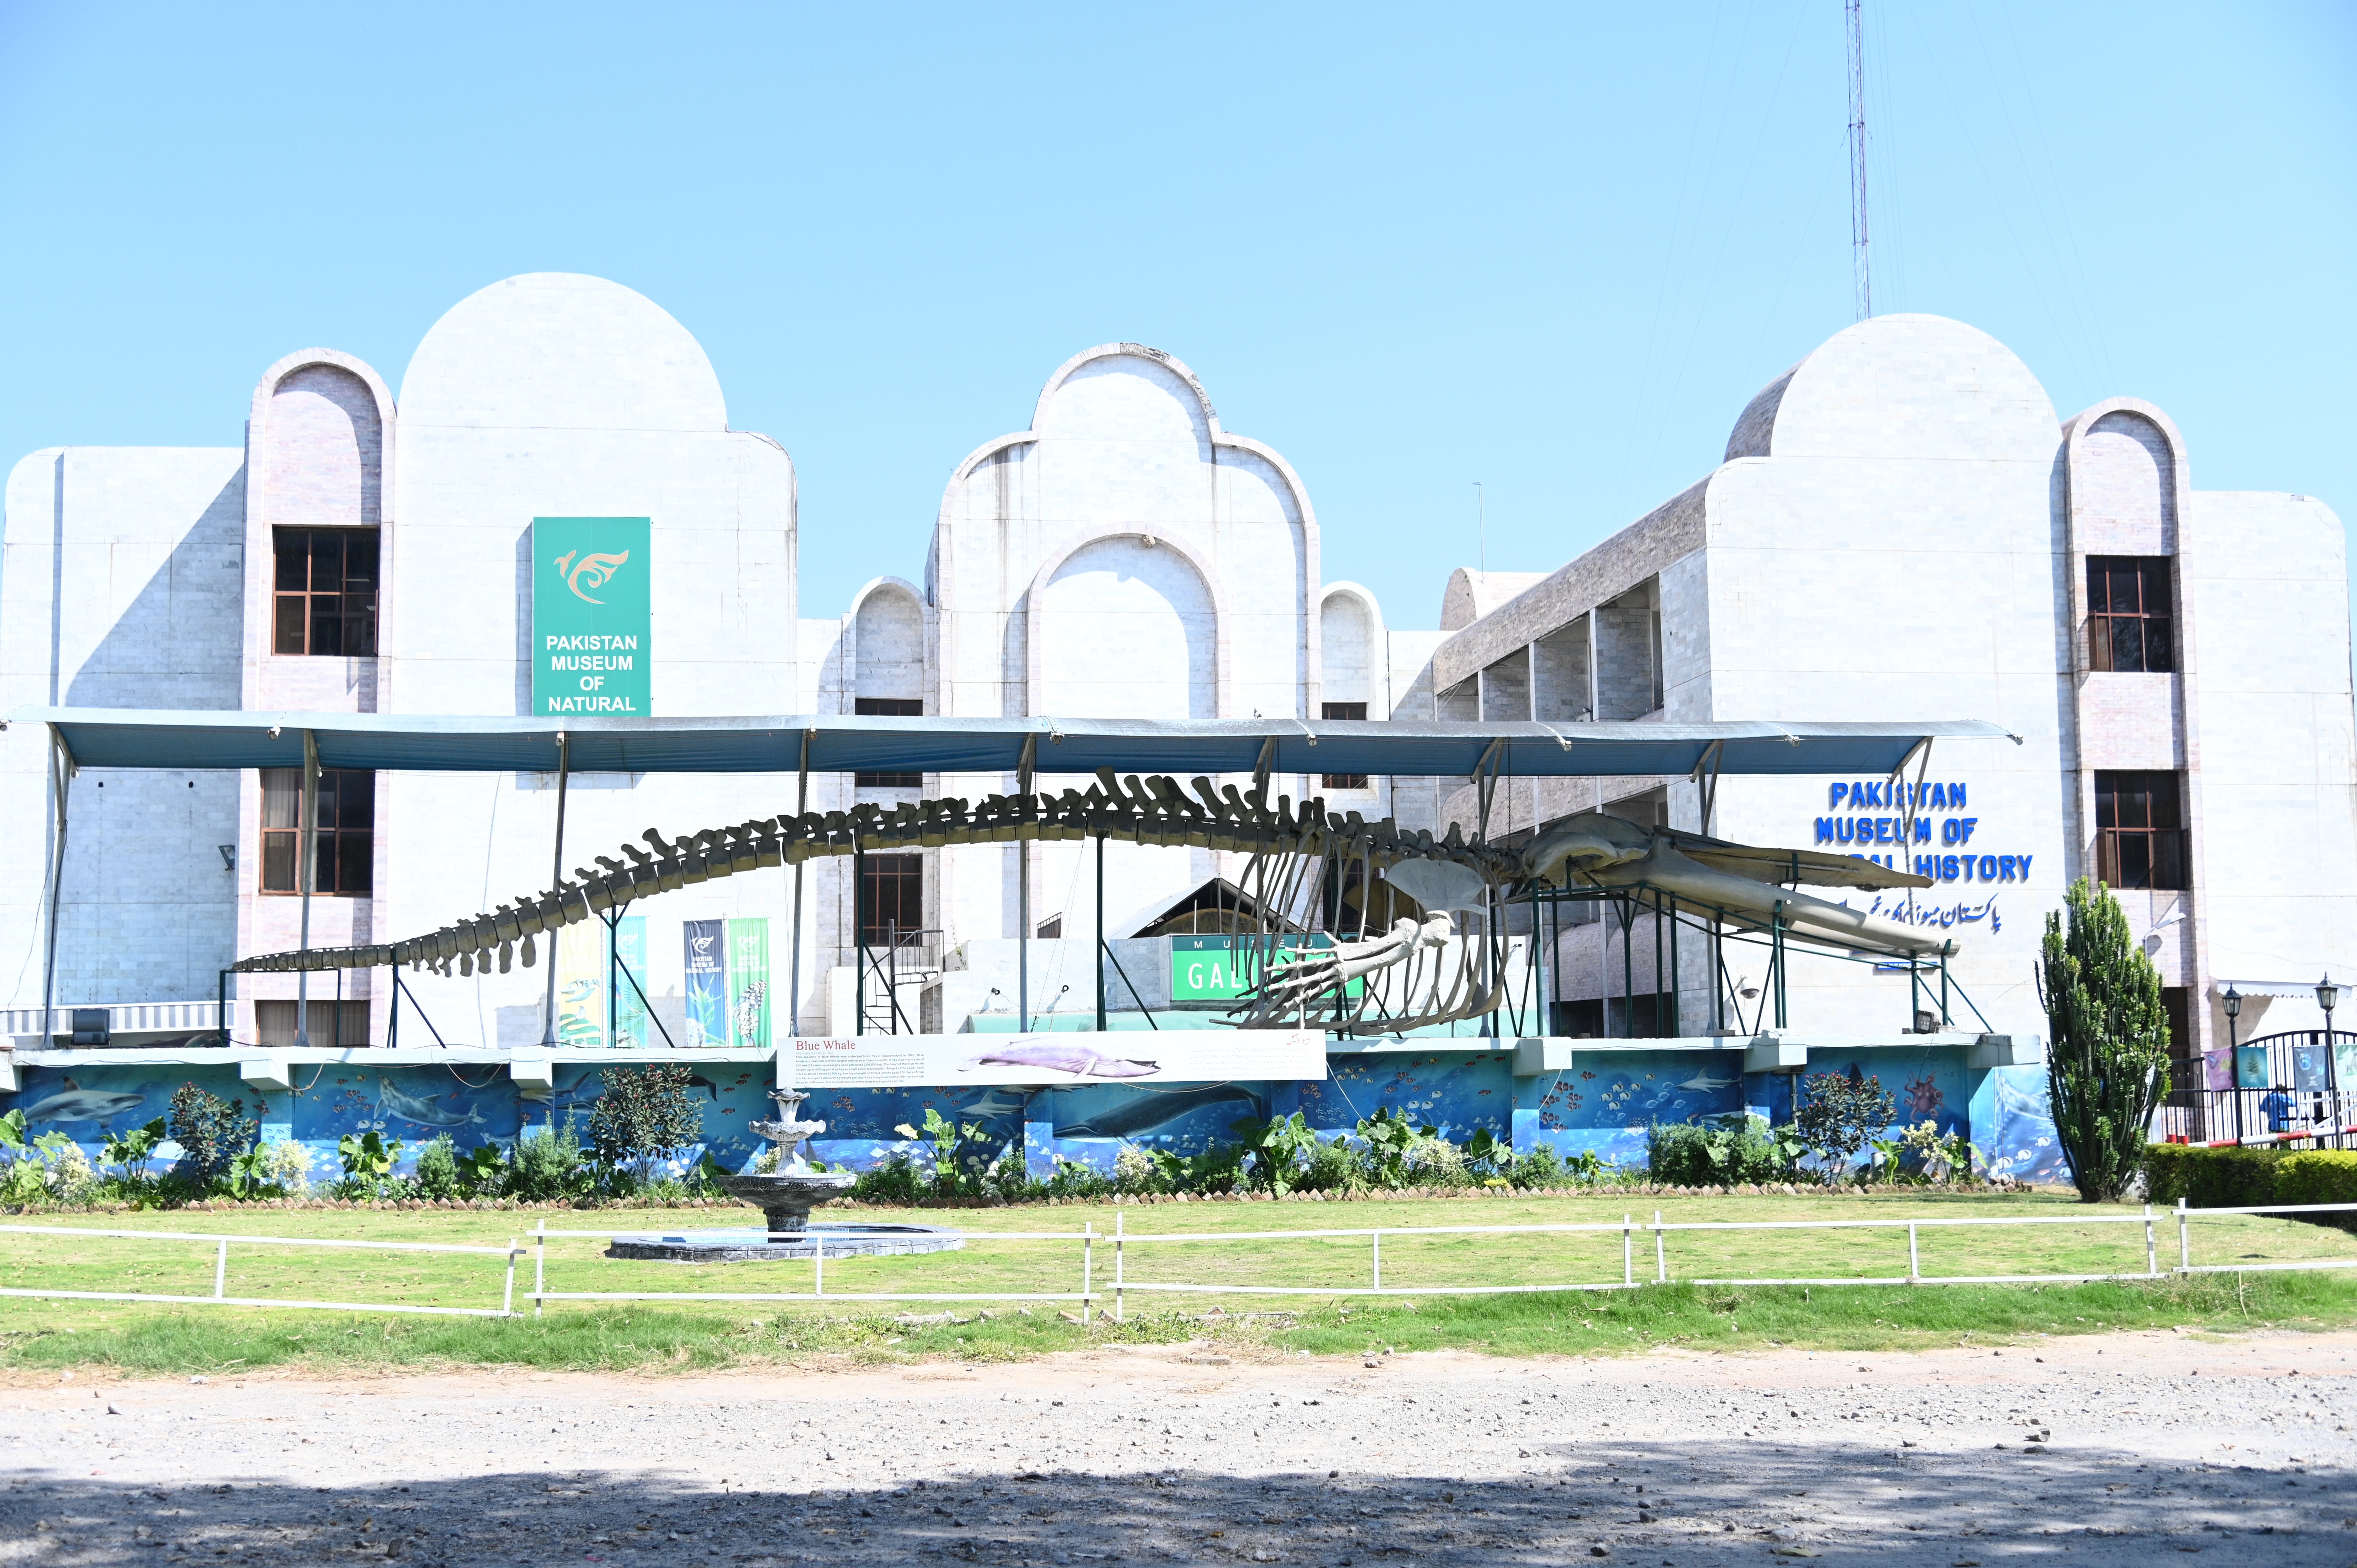 Pakistan Museum of Natural History, established in 1976, It has exhibits and galleries which display and provide information about the ecology, geology, and paleontology of the country